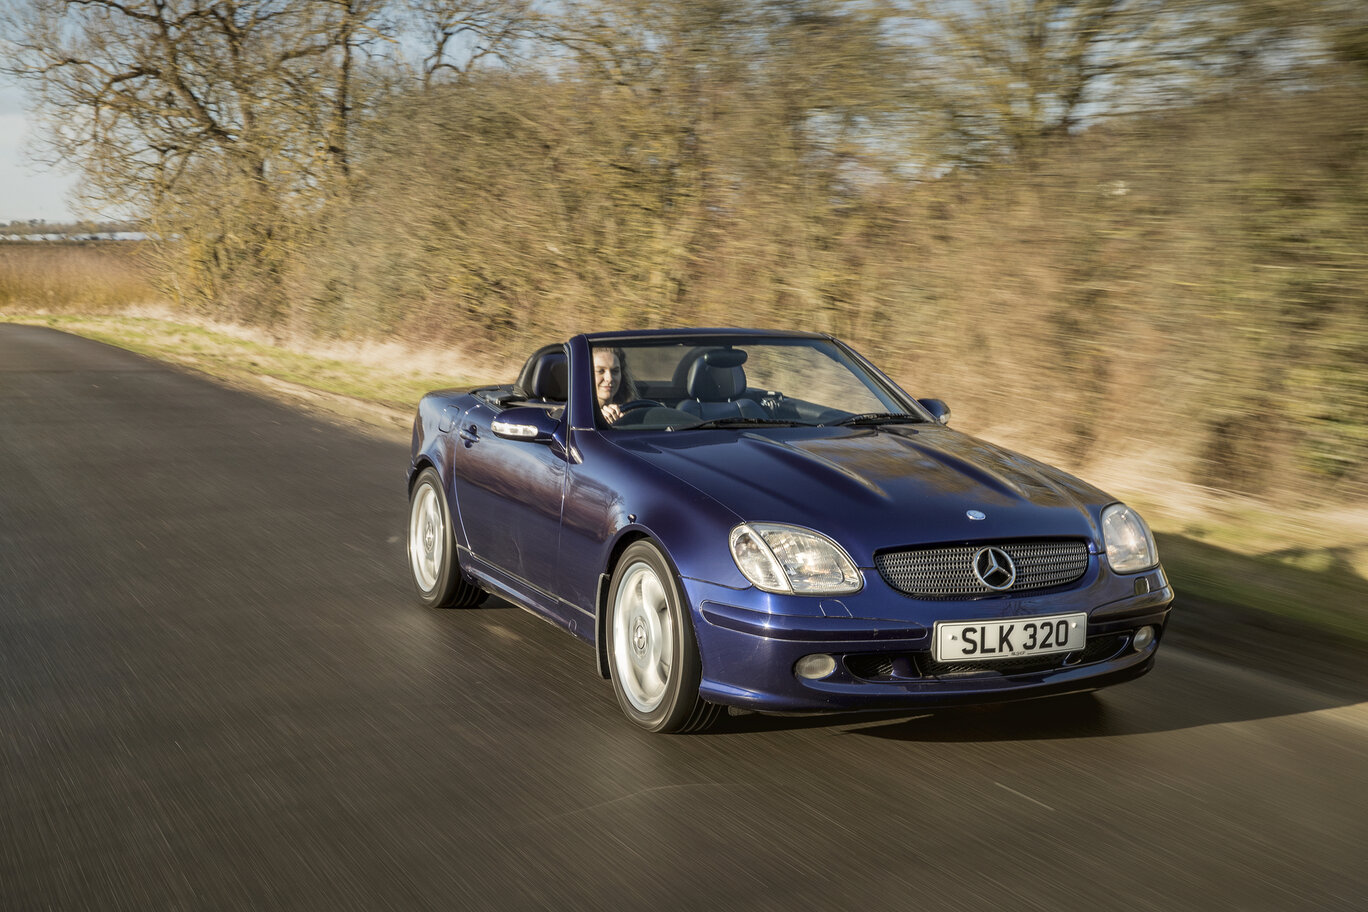 Mercedes SLK driving down a country road.